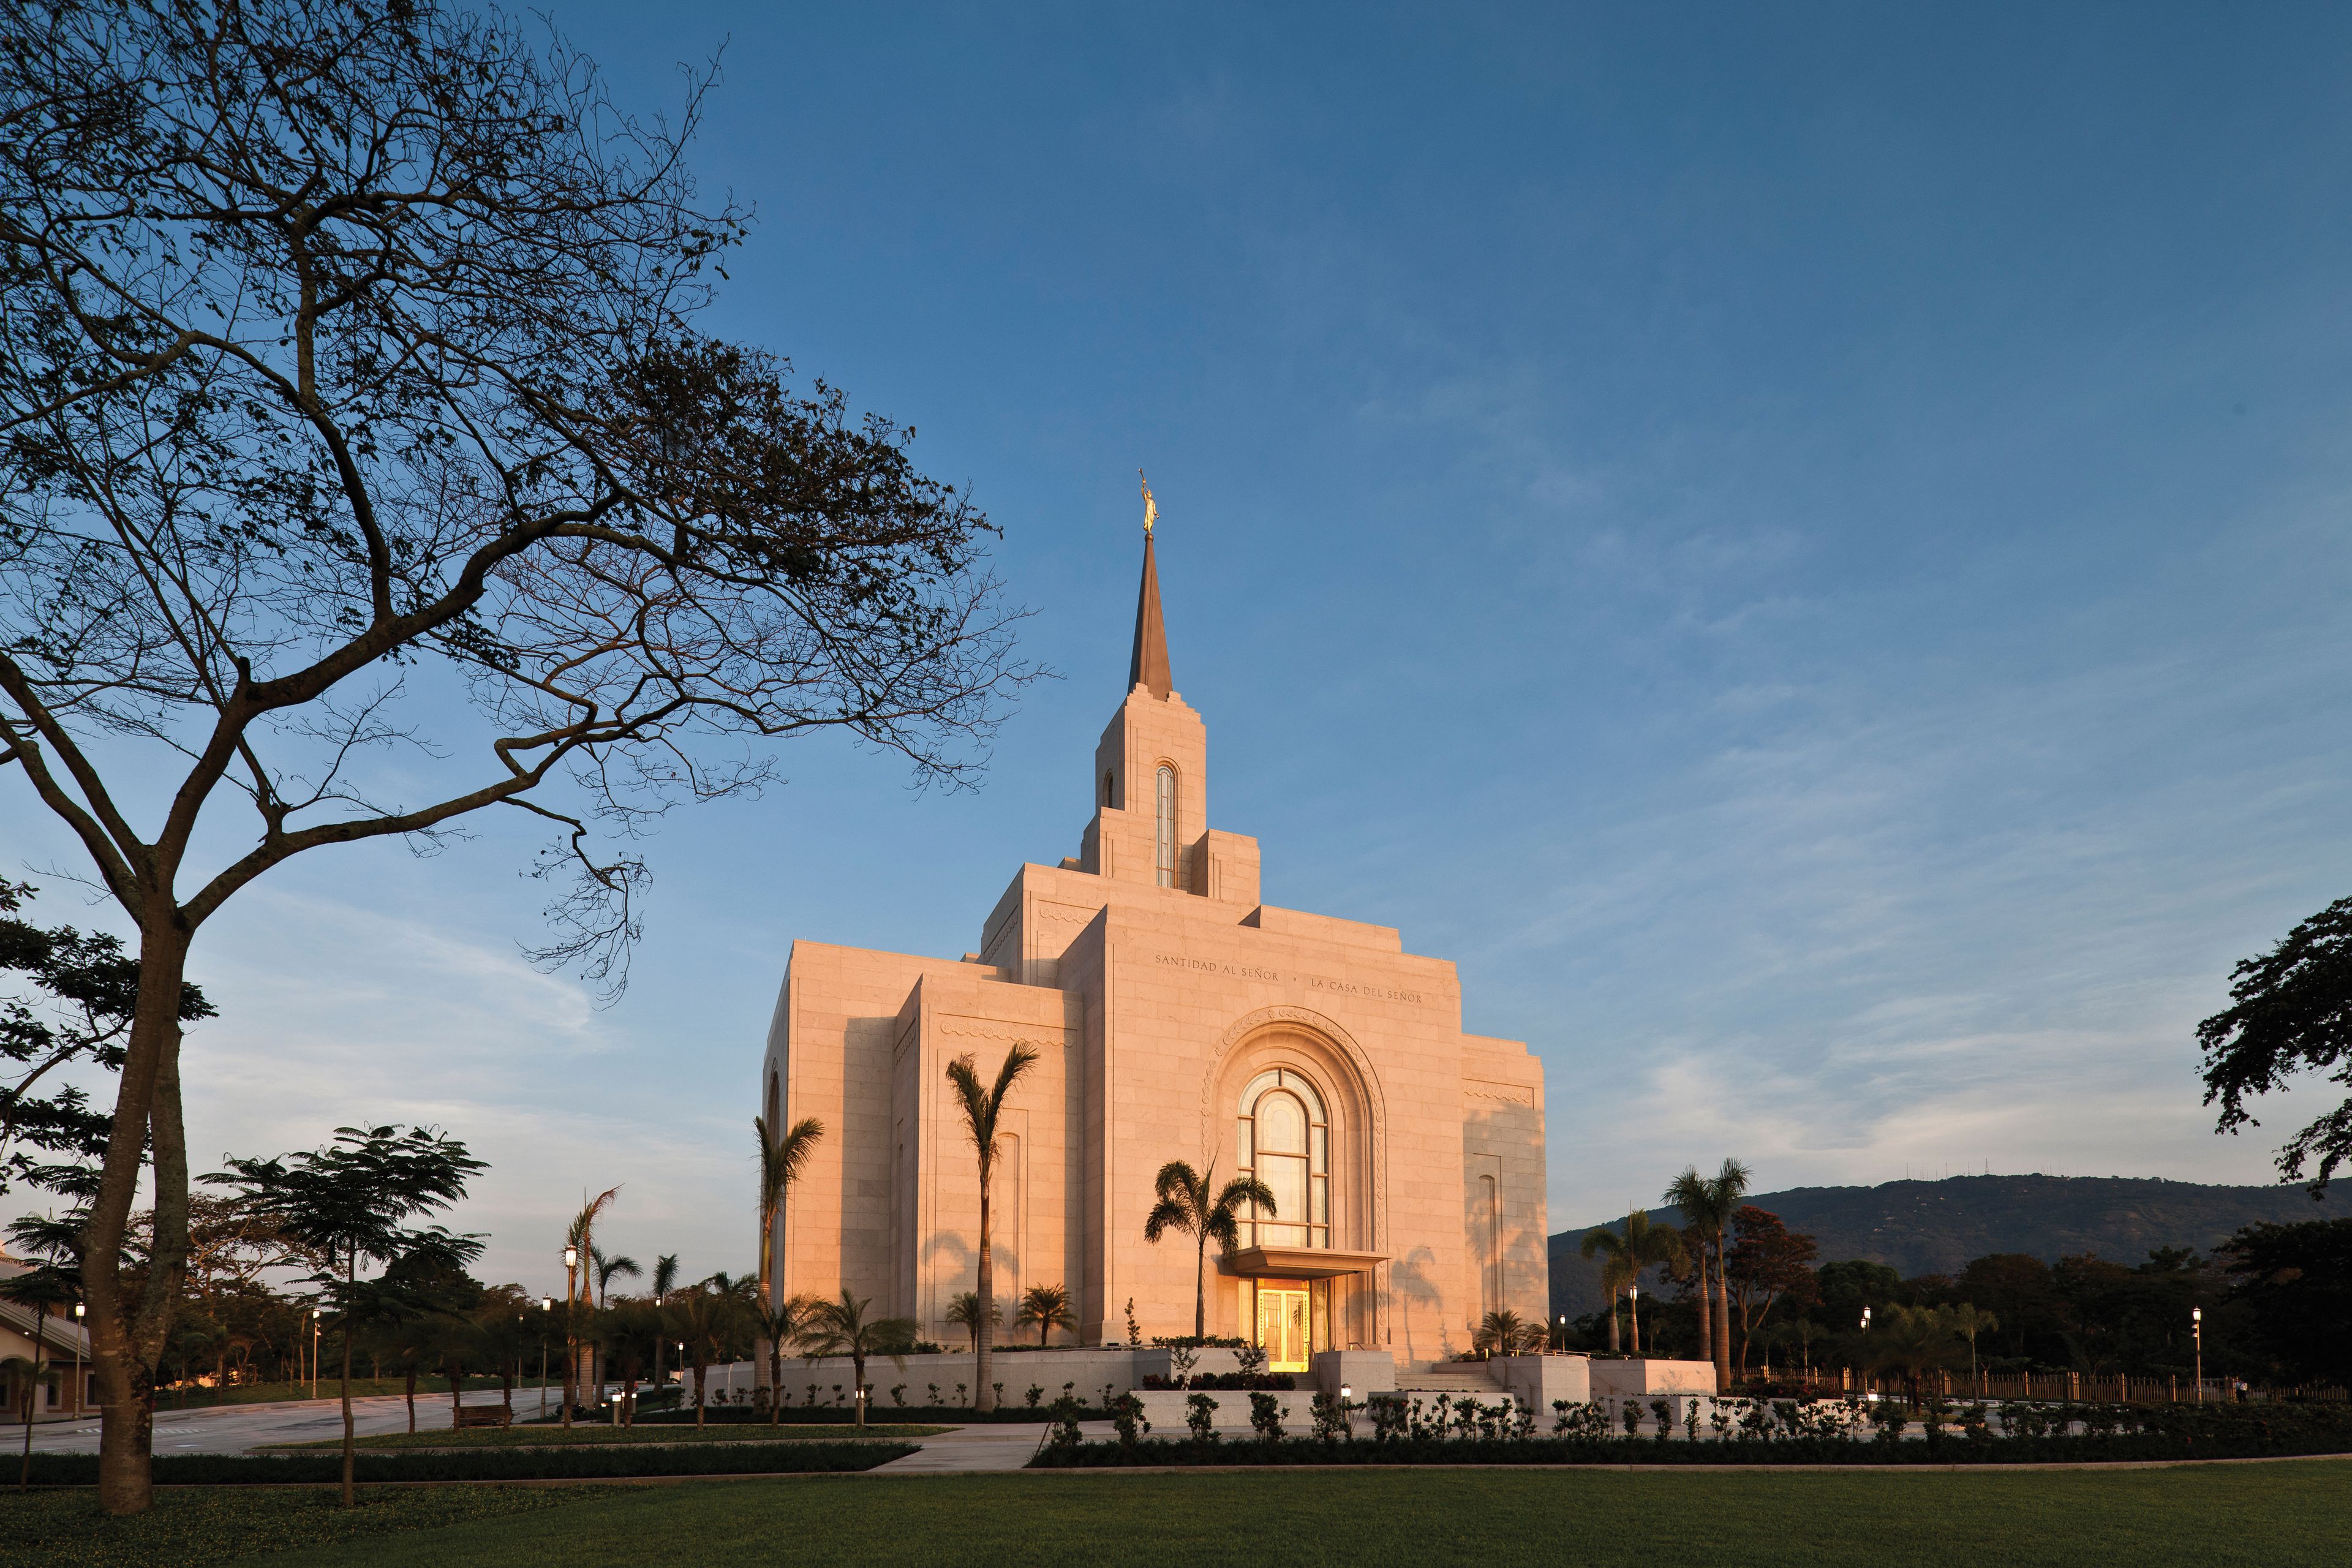 The San Salvador El Salvador Temple at sunset, including the scenery and entrance.